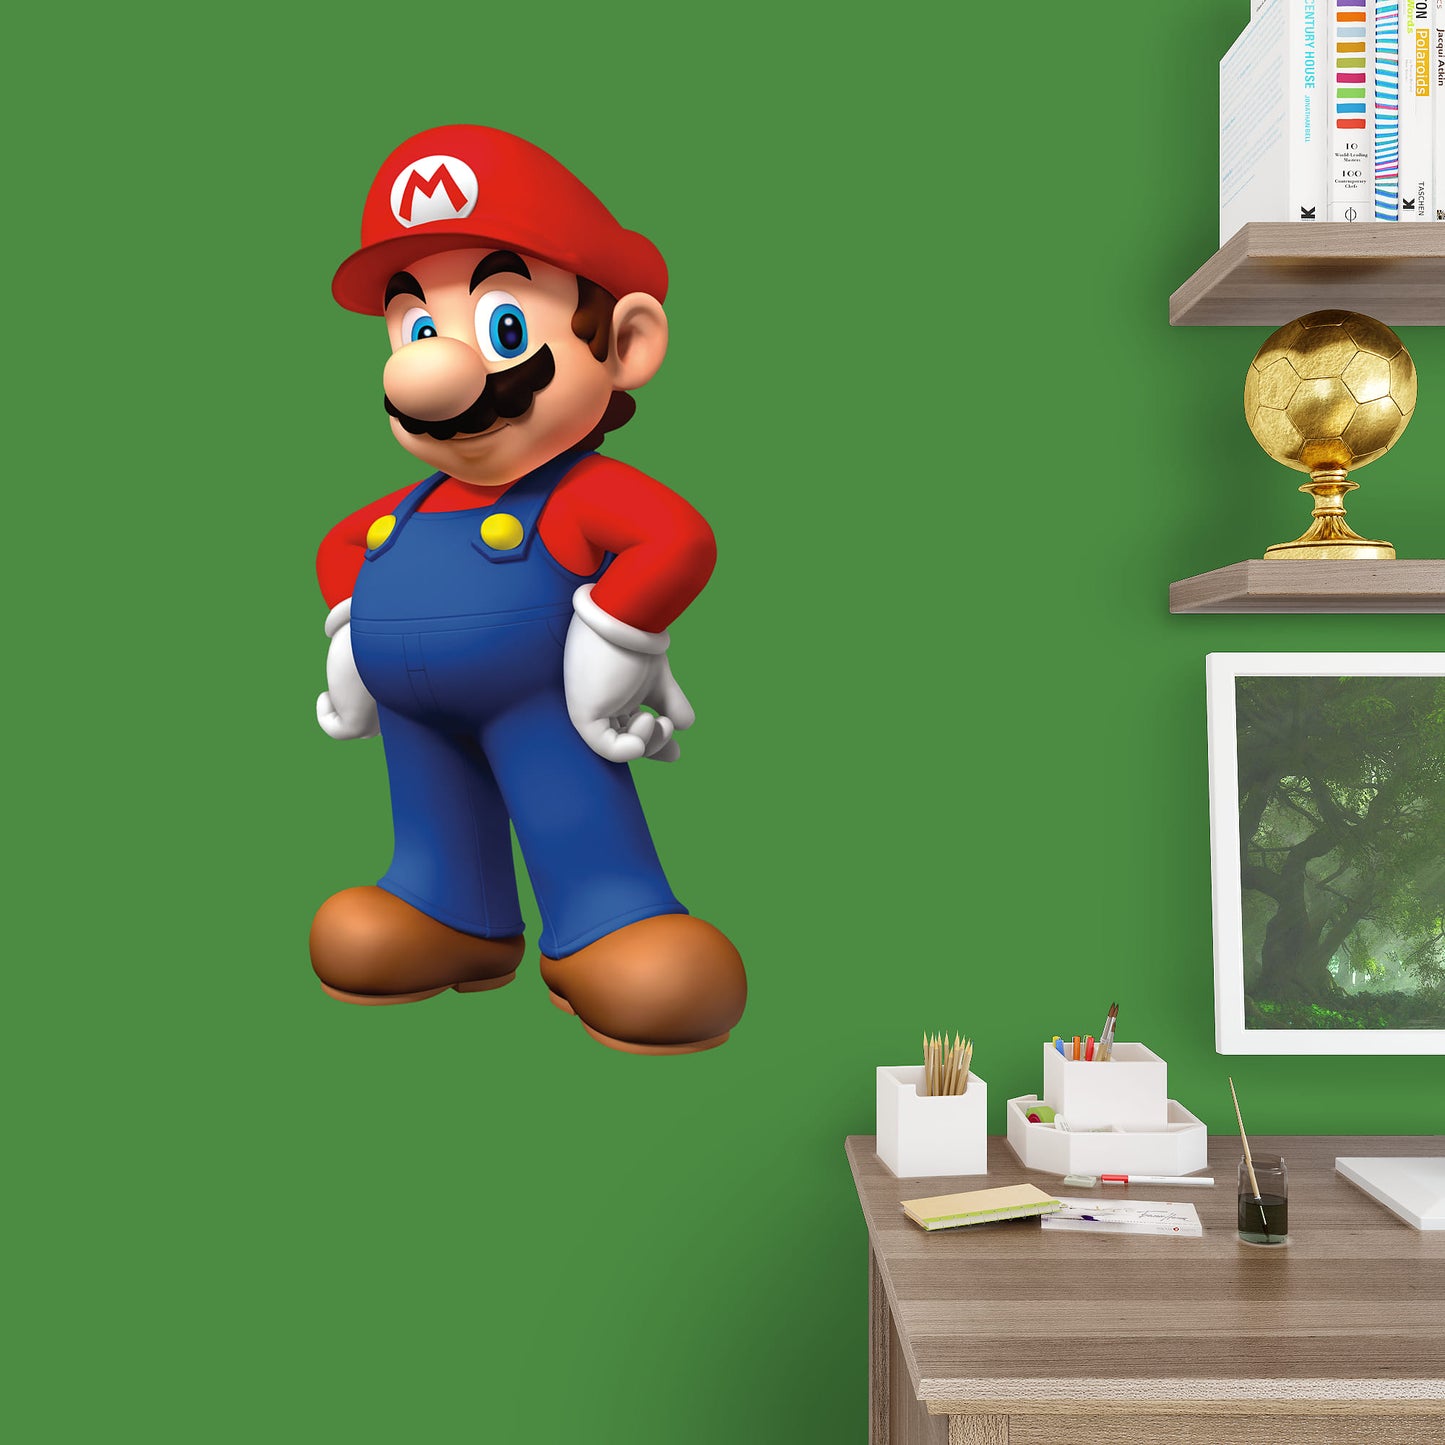 Mario - Officially Licensed Nintendo Removable Wall Decal